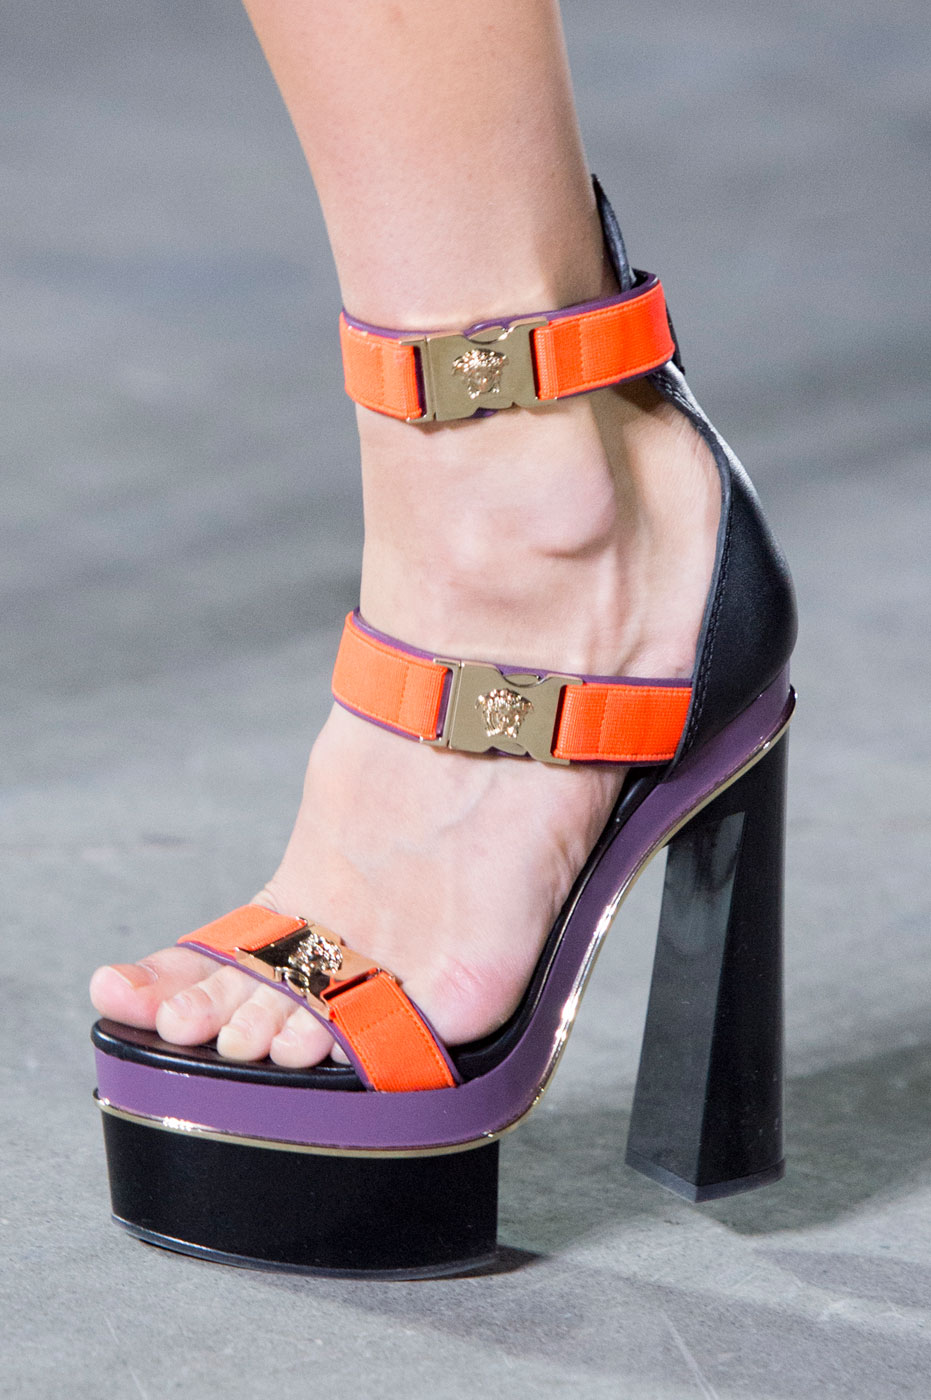 Versace '16 | The Spring '16 Runway Shows That Had Us Like 